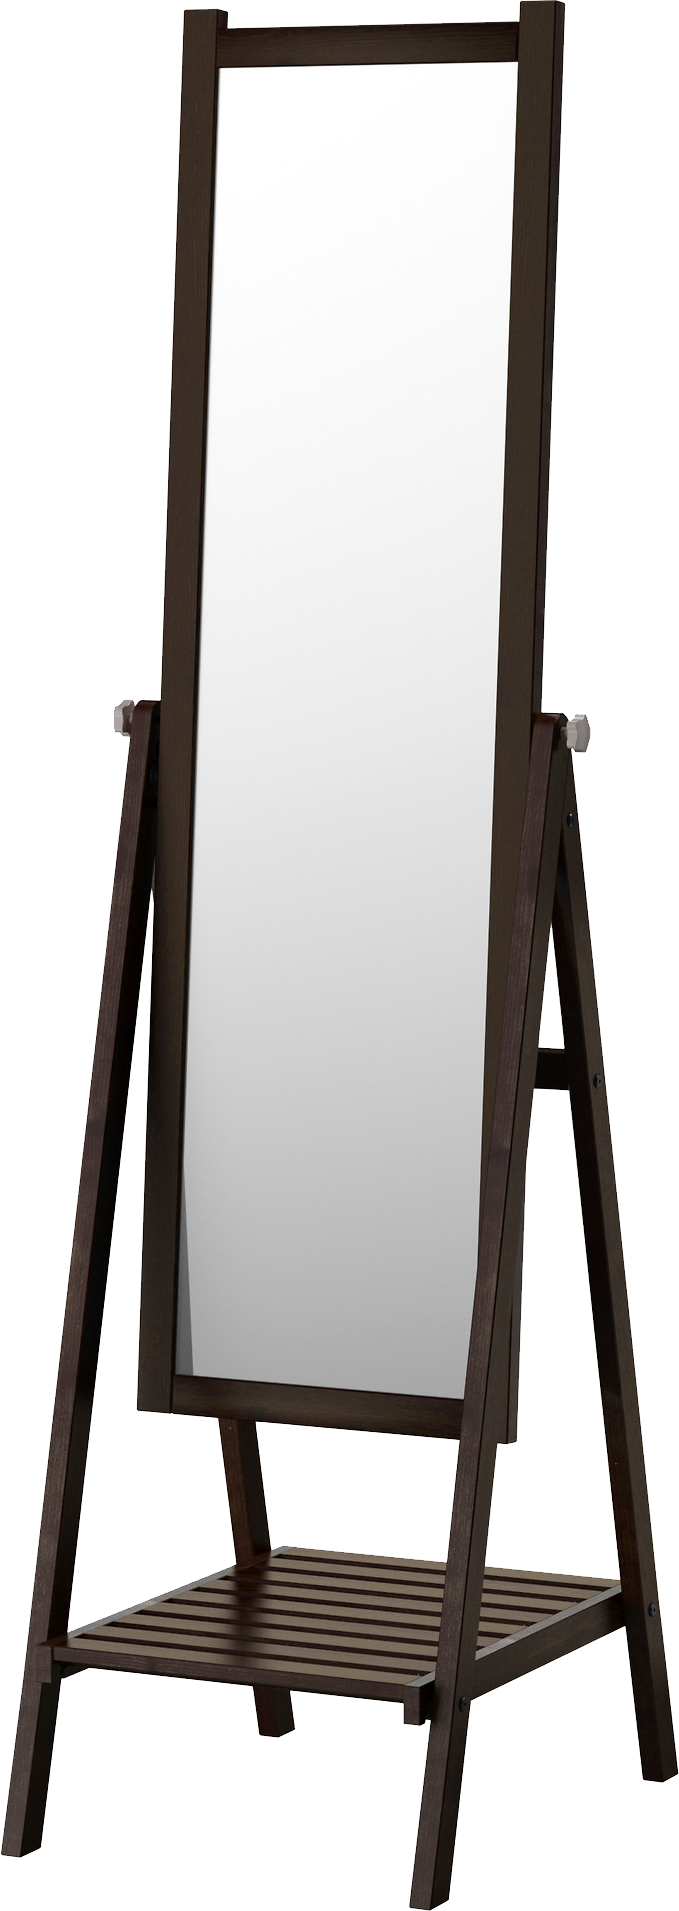 Download PNG image - Mirror PNG Pic 